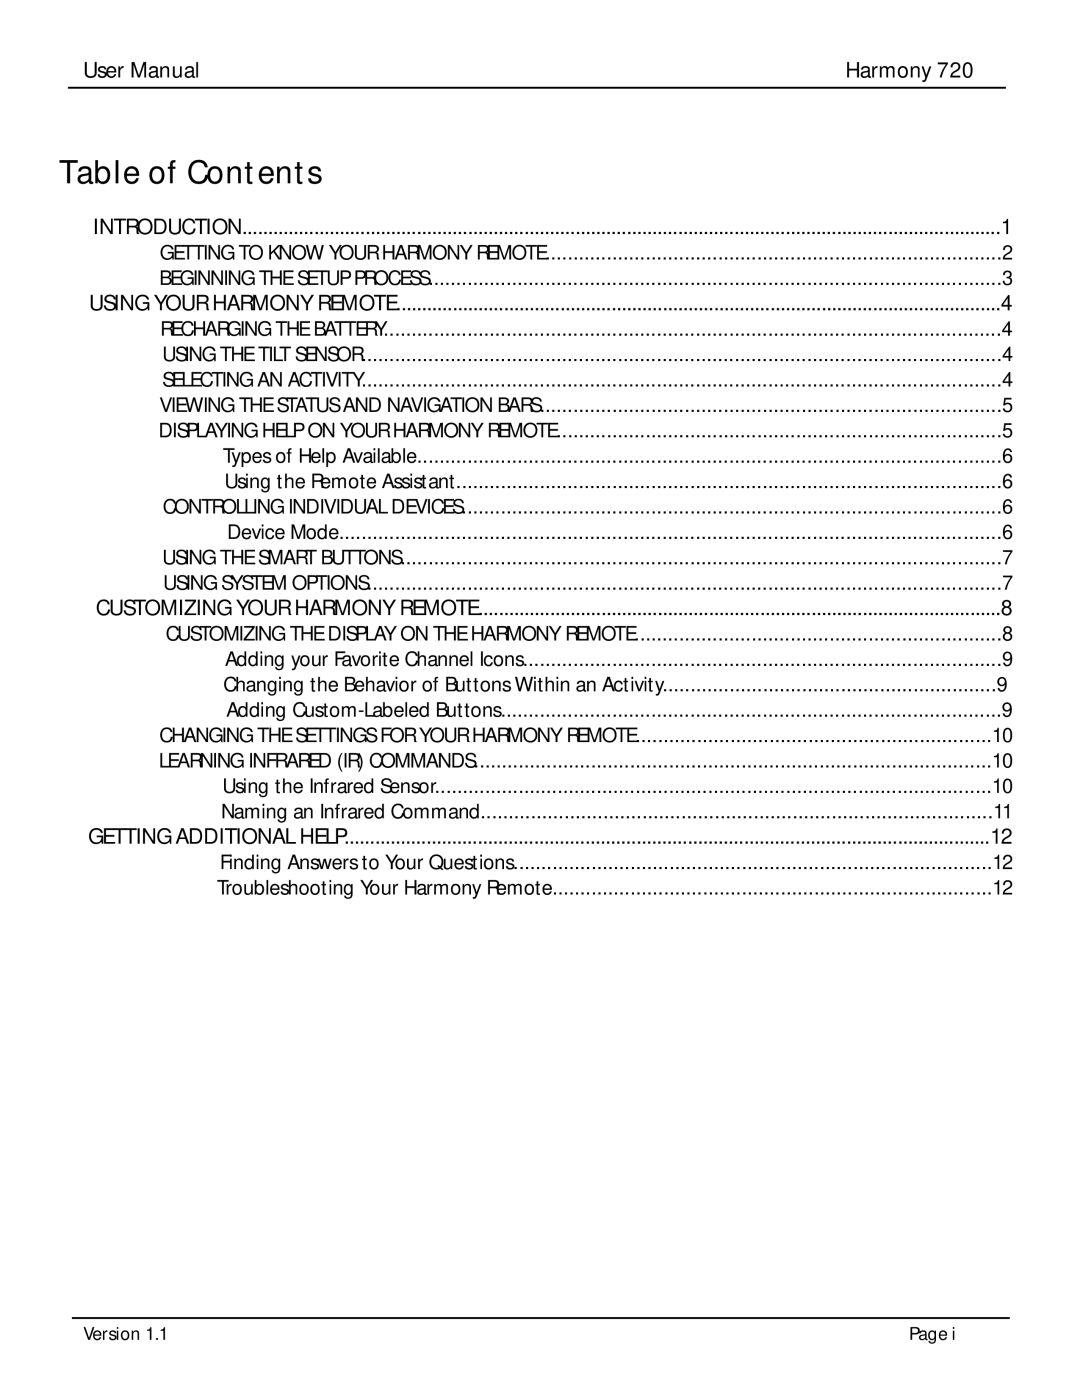 Logitech 720 user manual Table of Contents 